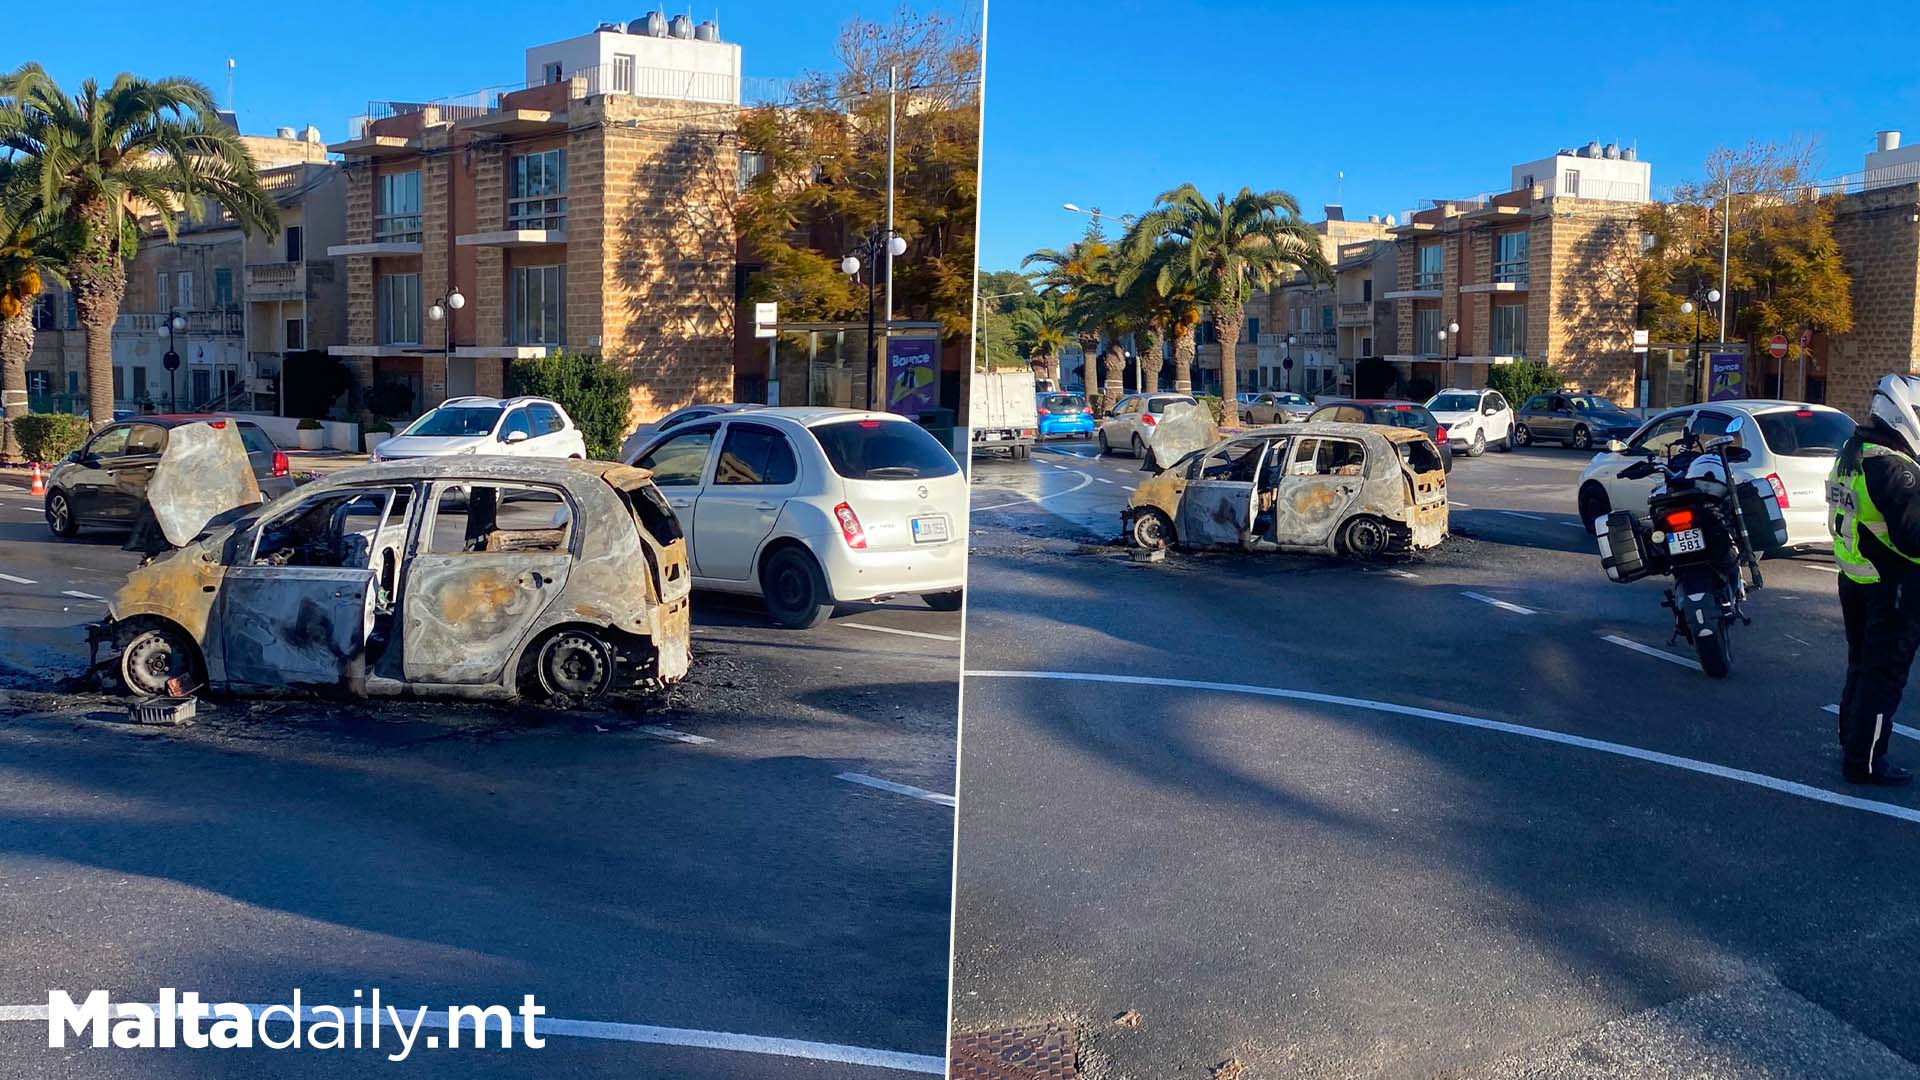 Burned Down Car In Middle of H'Attard Road